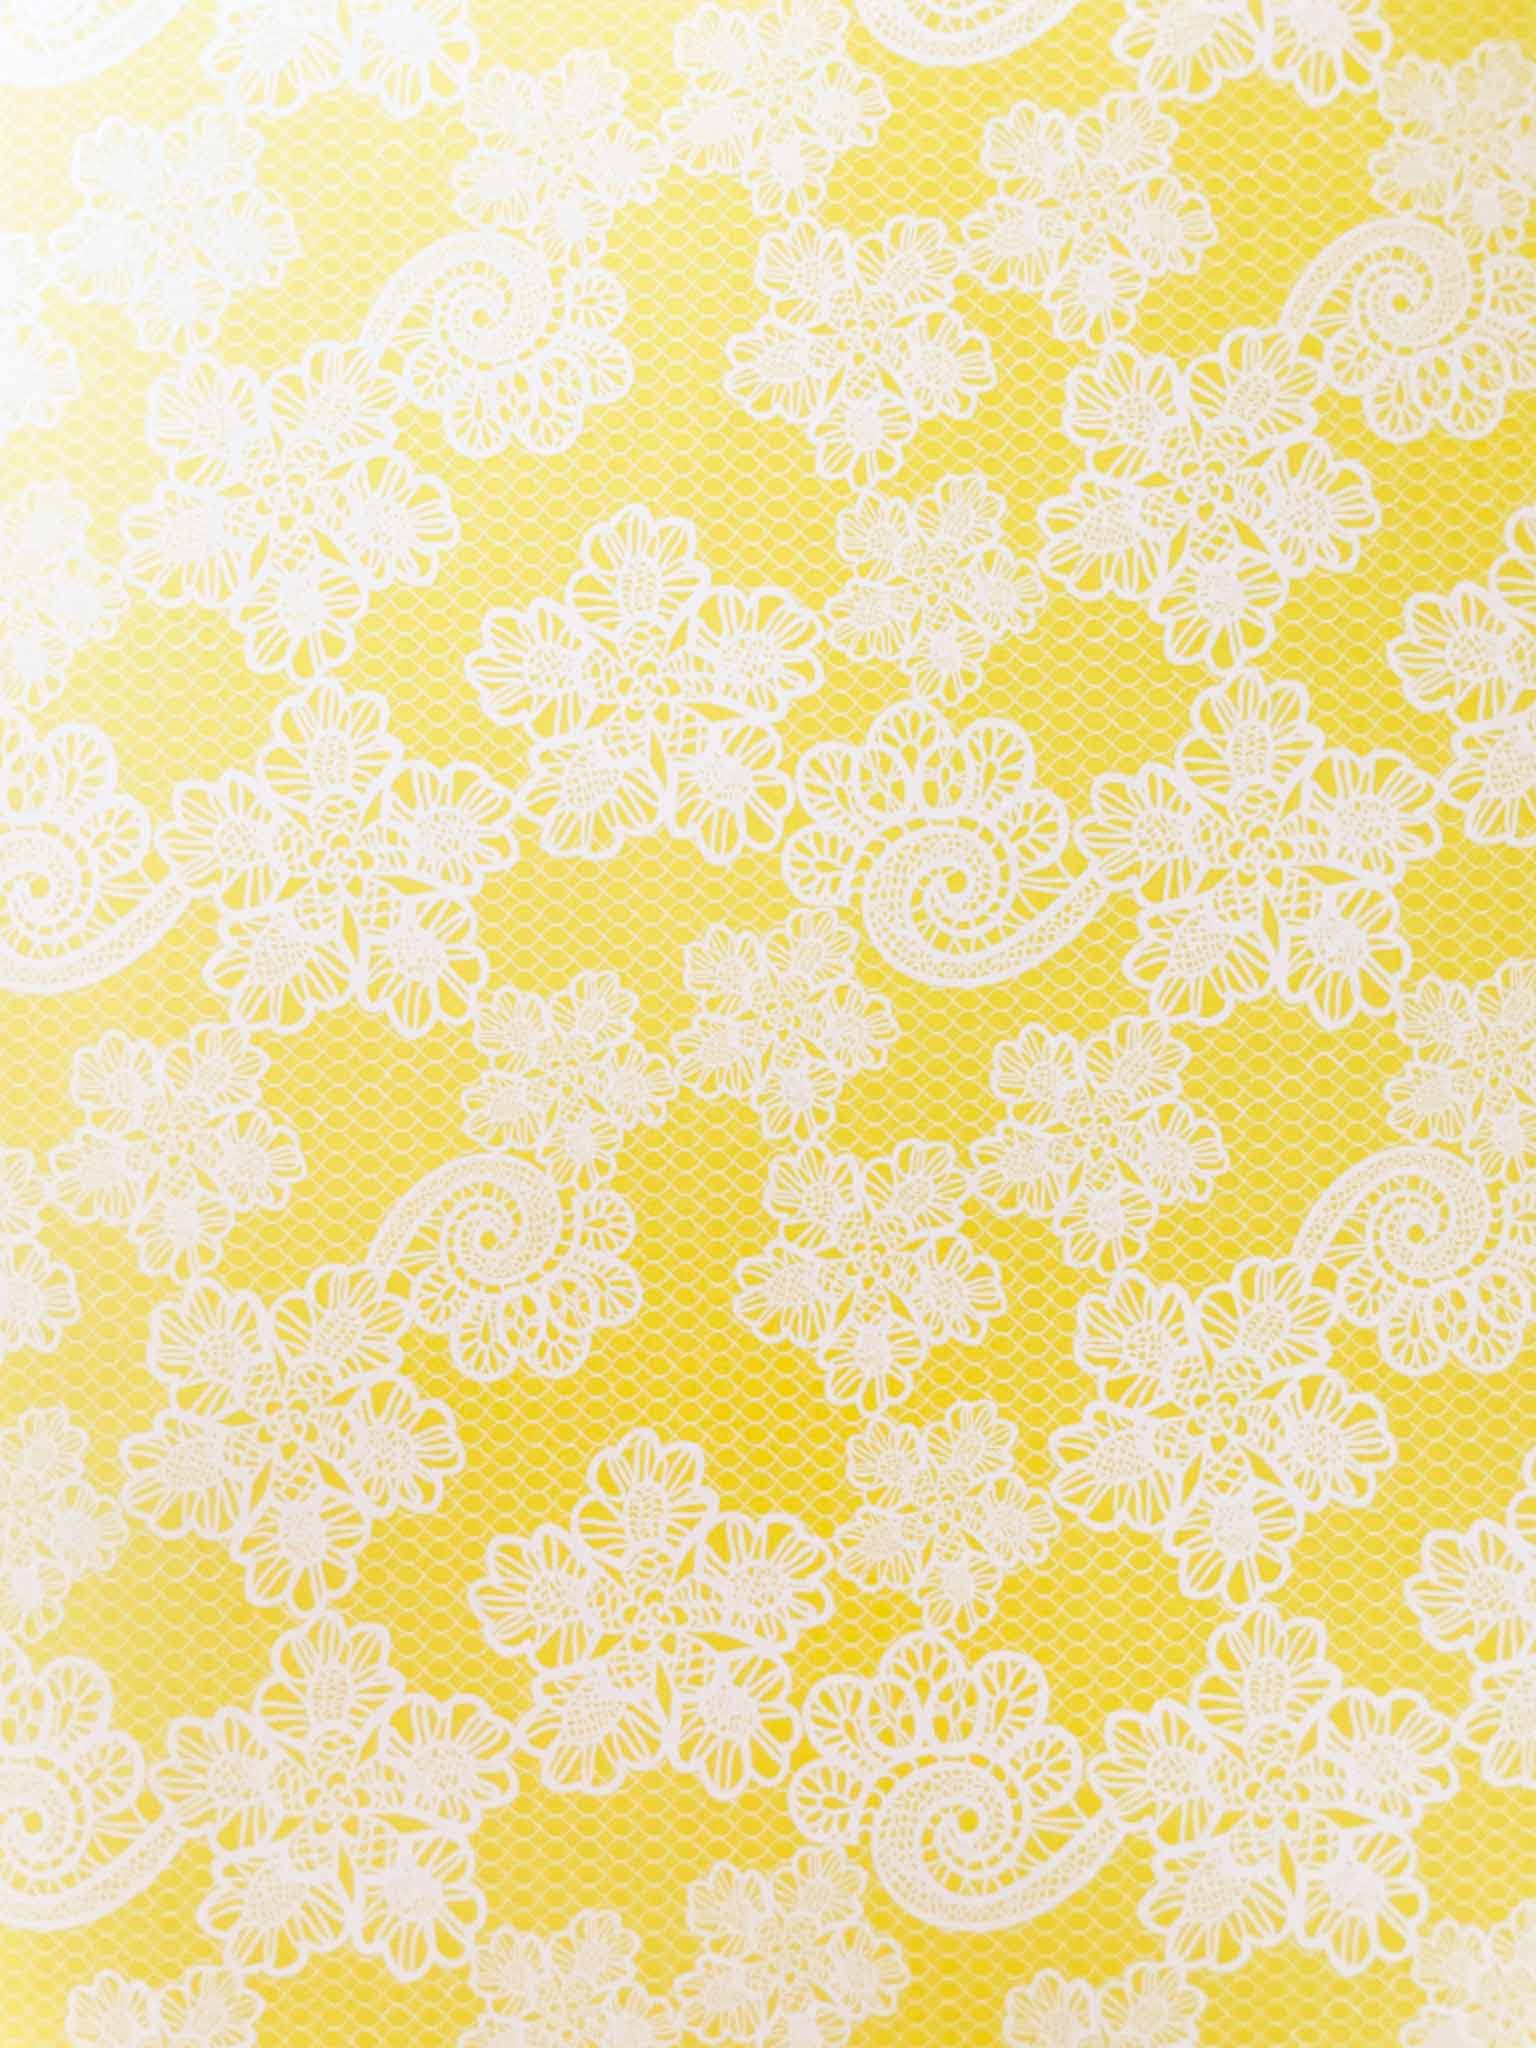 yellow-and-white-lace-pattern-paper